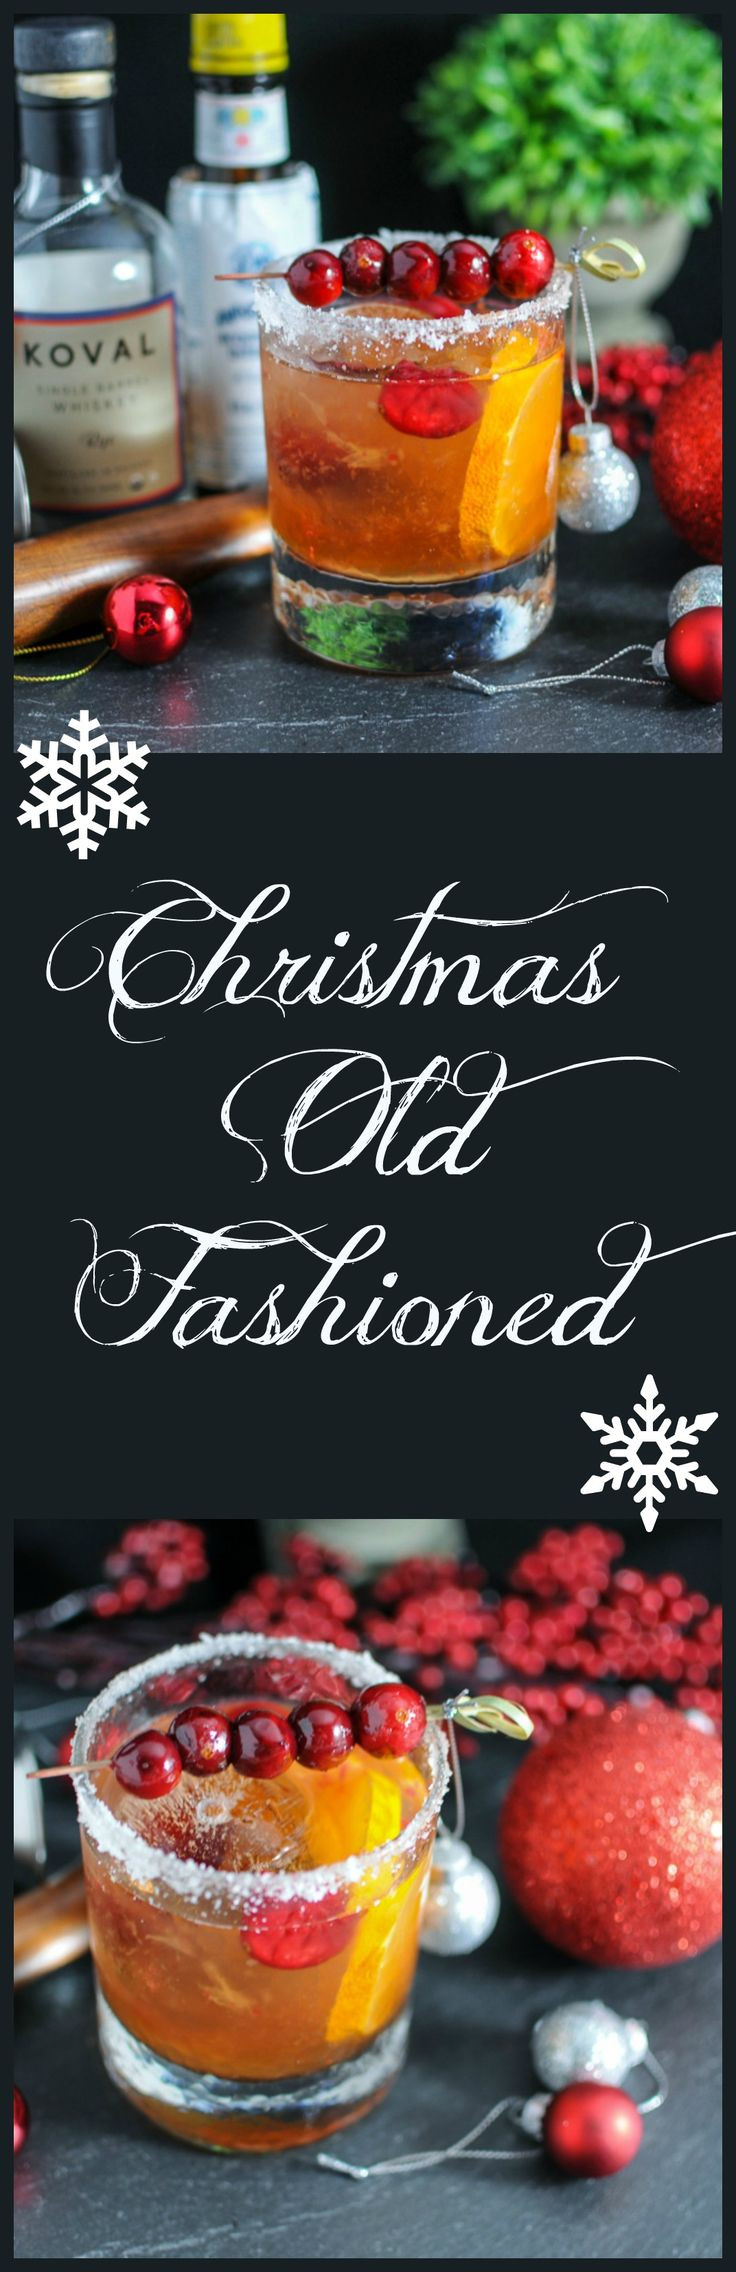 Bourbon Christmas Drinks
 1000 ideas about Old Fashioned Kitchen on Pinterest